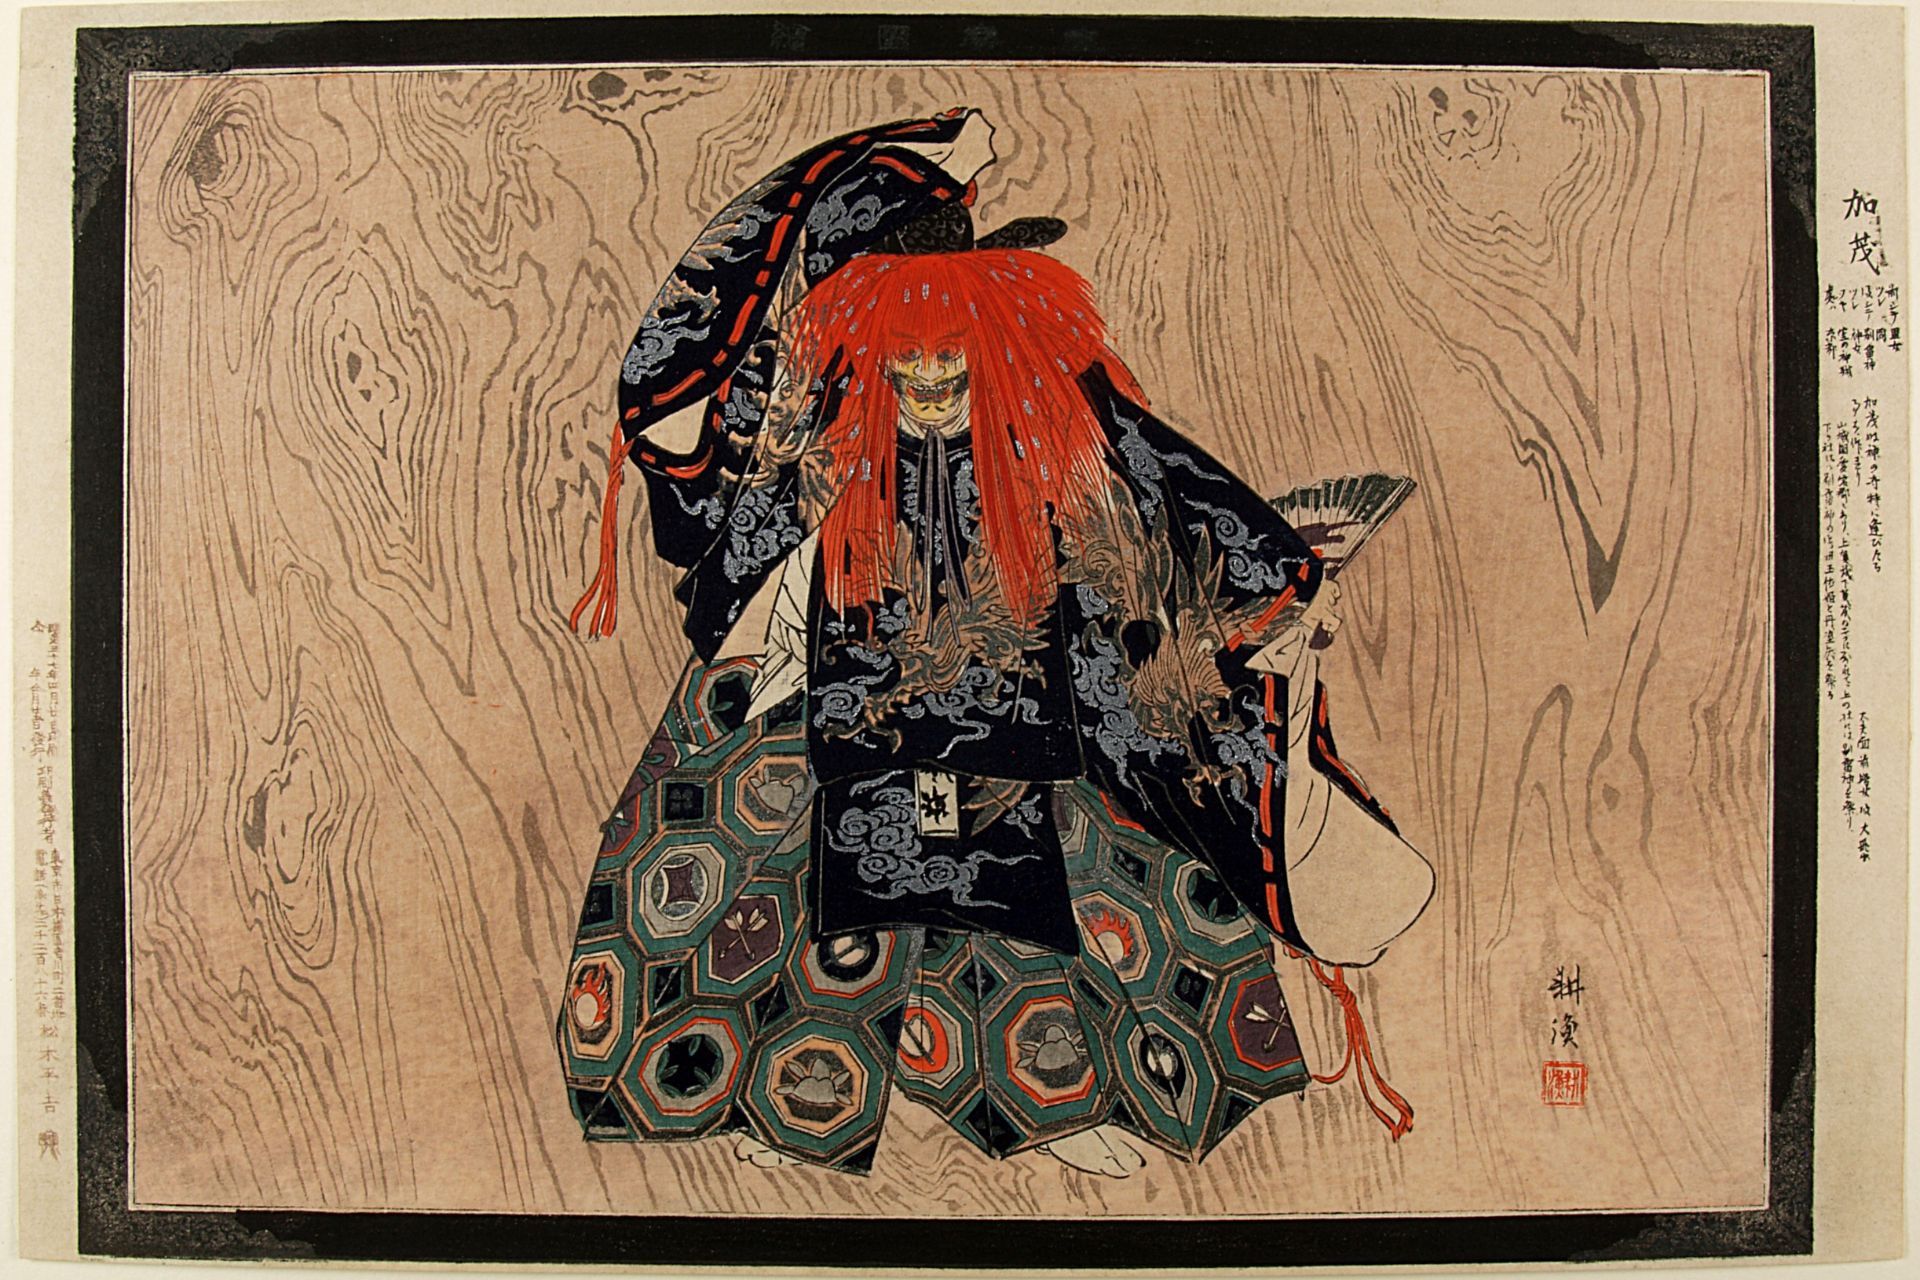 Japanese woodblock print entitled Kamo from the series Pictures of Noh Plays by Tsukioka Kogyo dated 1904